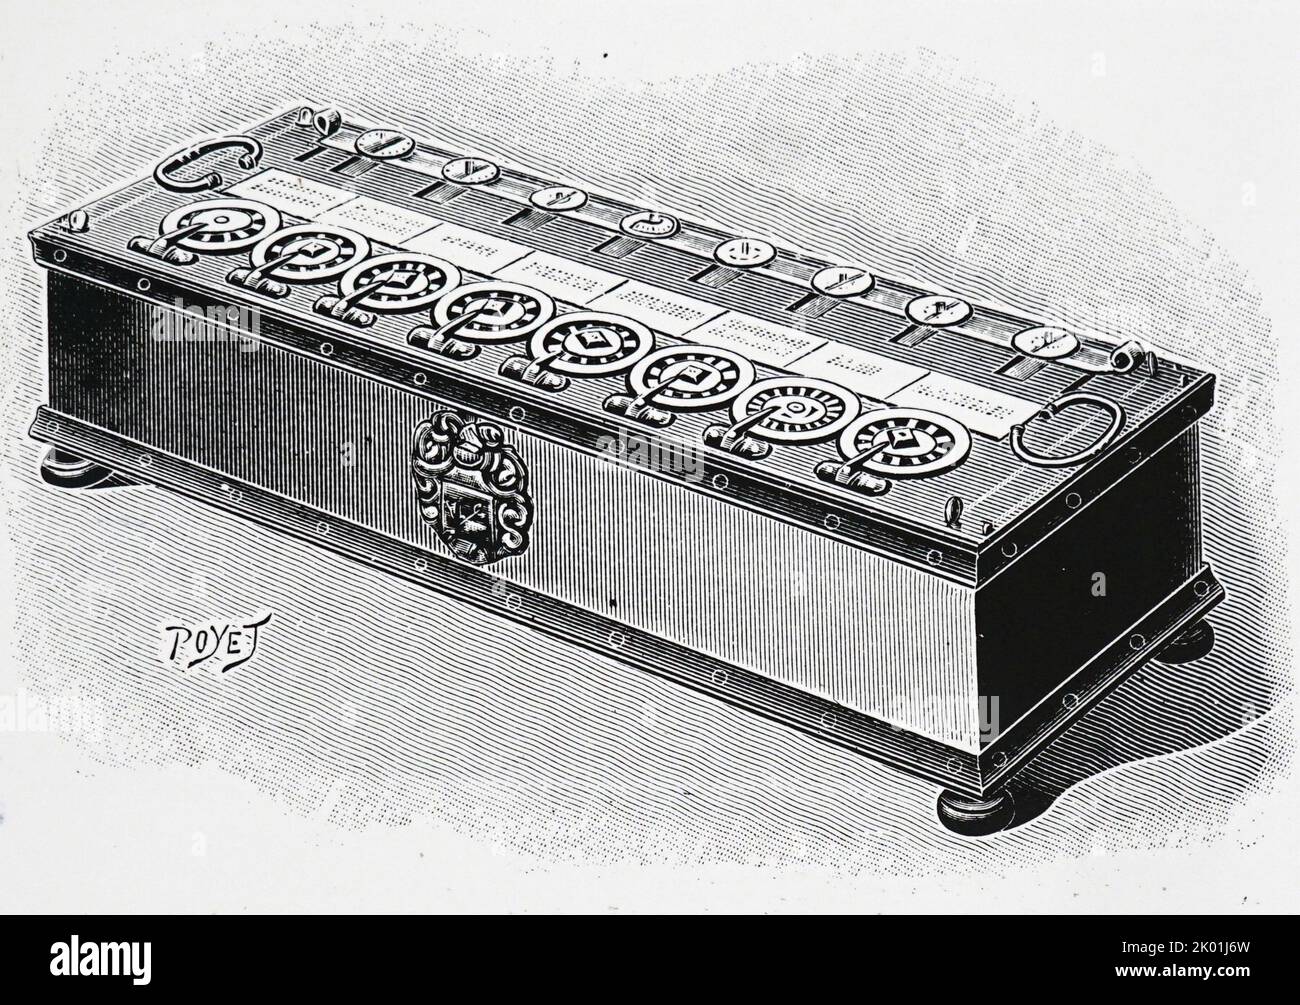 Adding machine designed by Blaise Pascal in 1642 when he was 19 years-old. From La Nature, Paris, 1904. Stock Photo